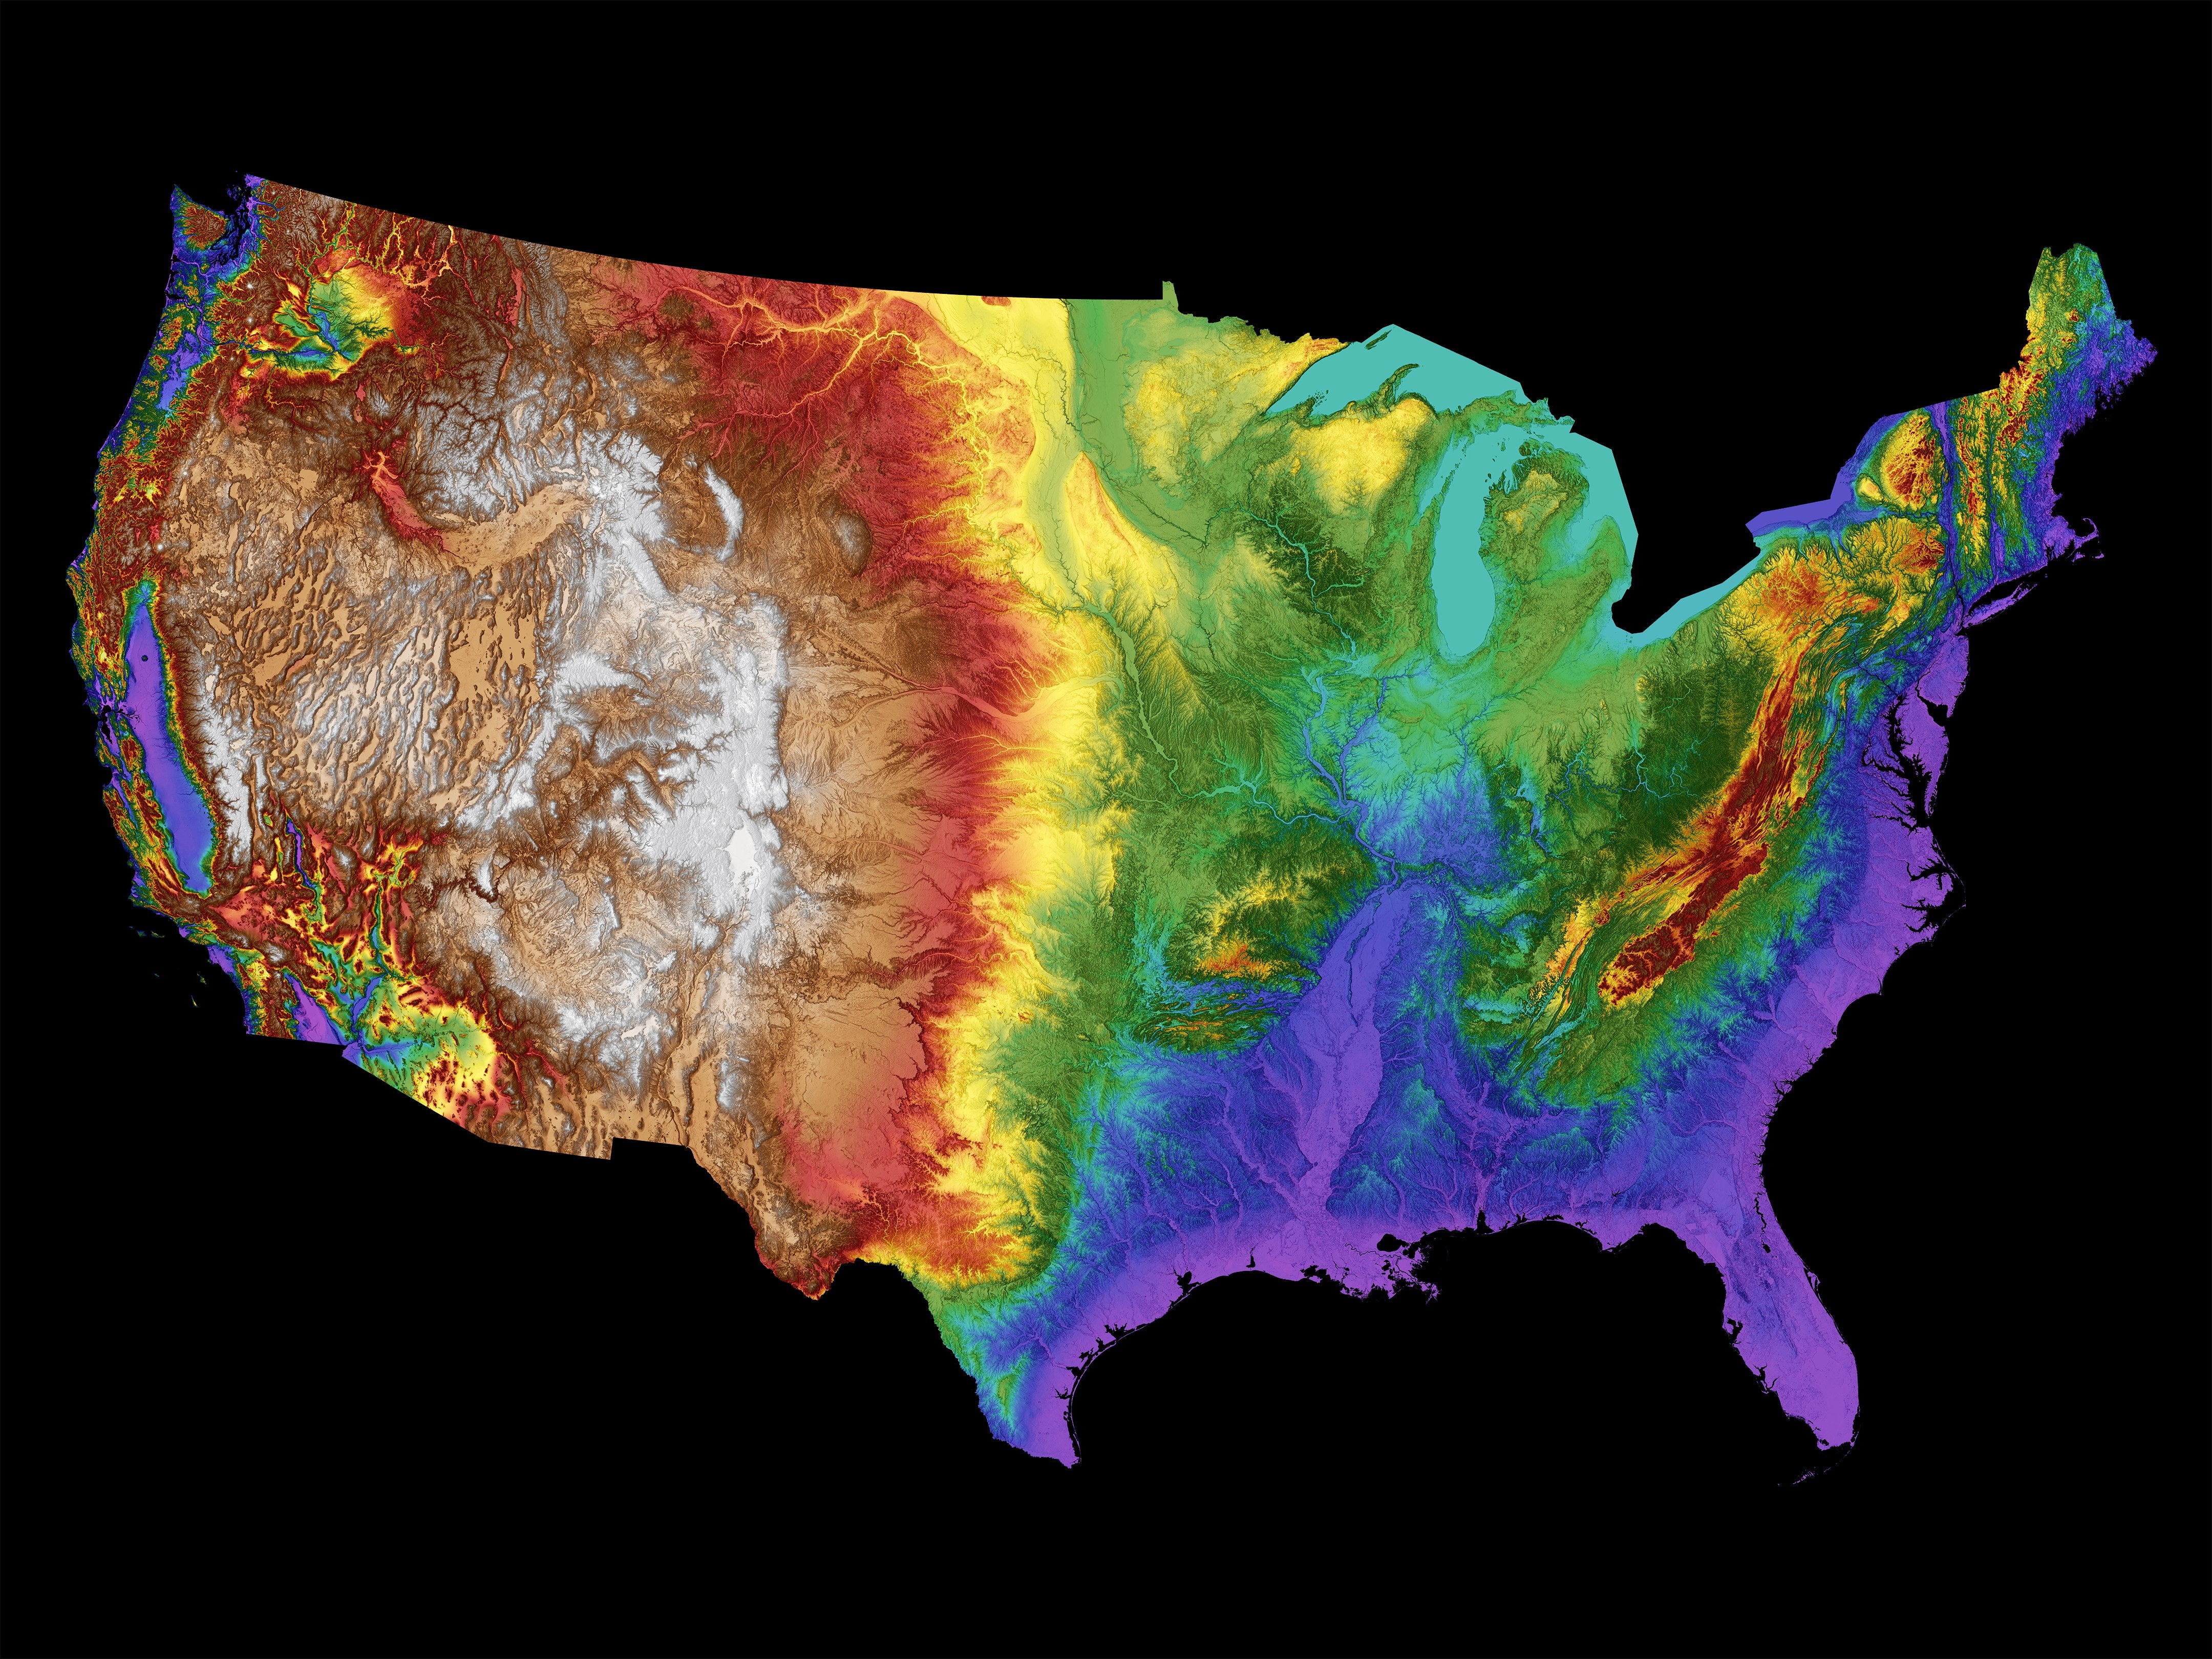 USA Color Elevation Map (Contiguous) Wall Art Poster Print With Black Background